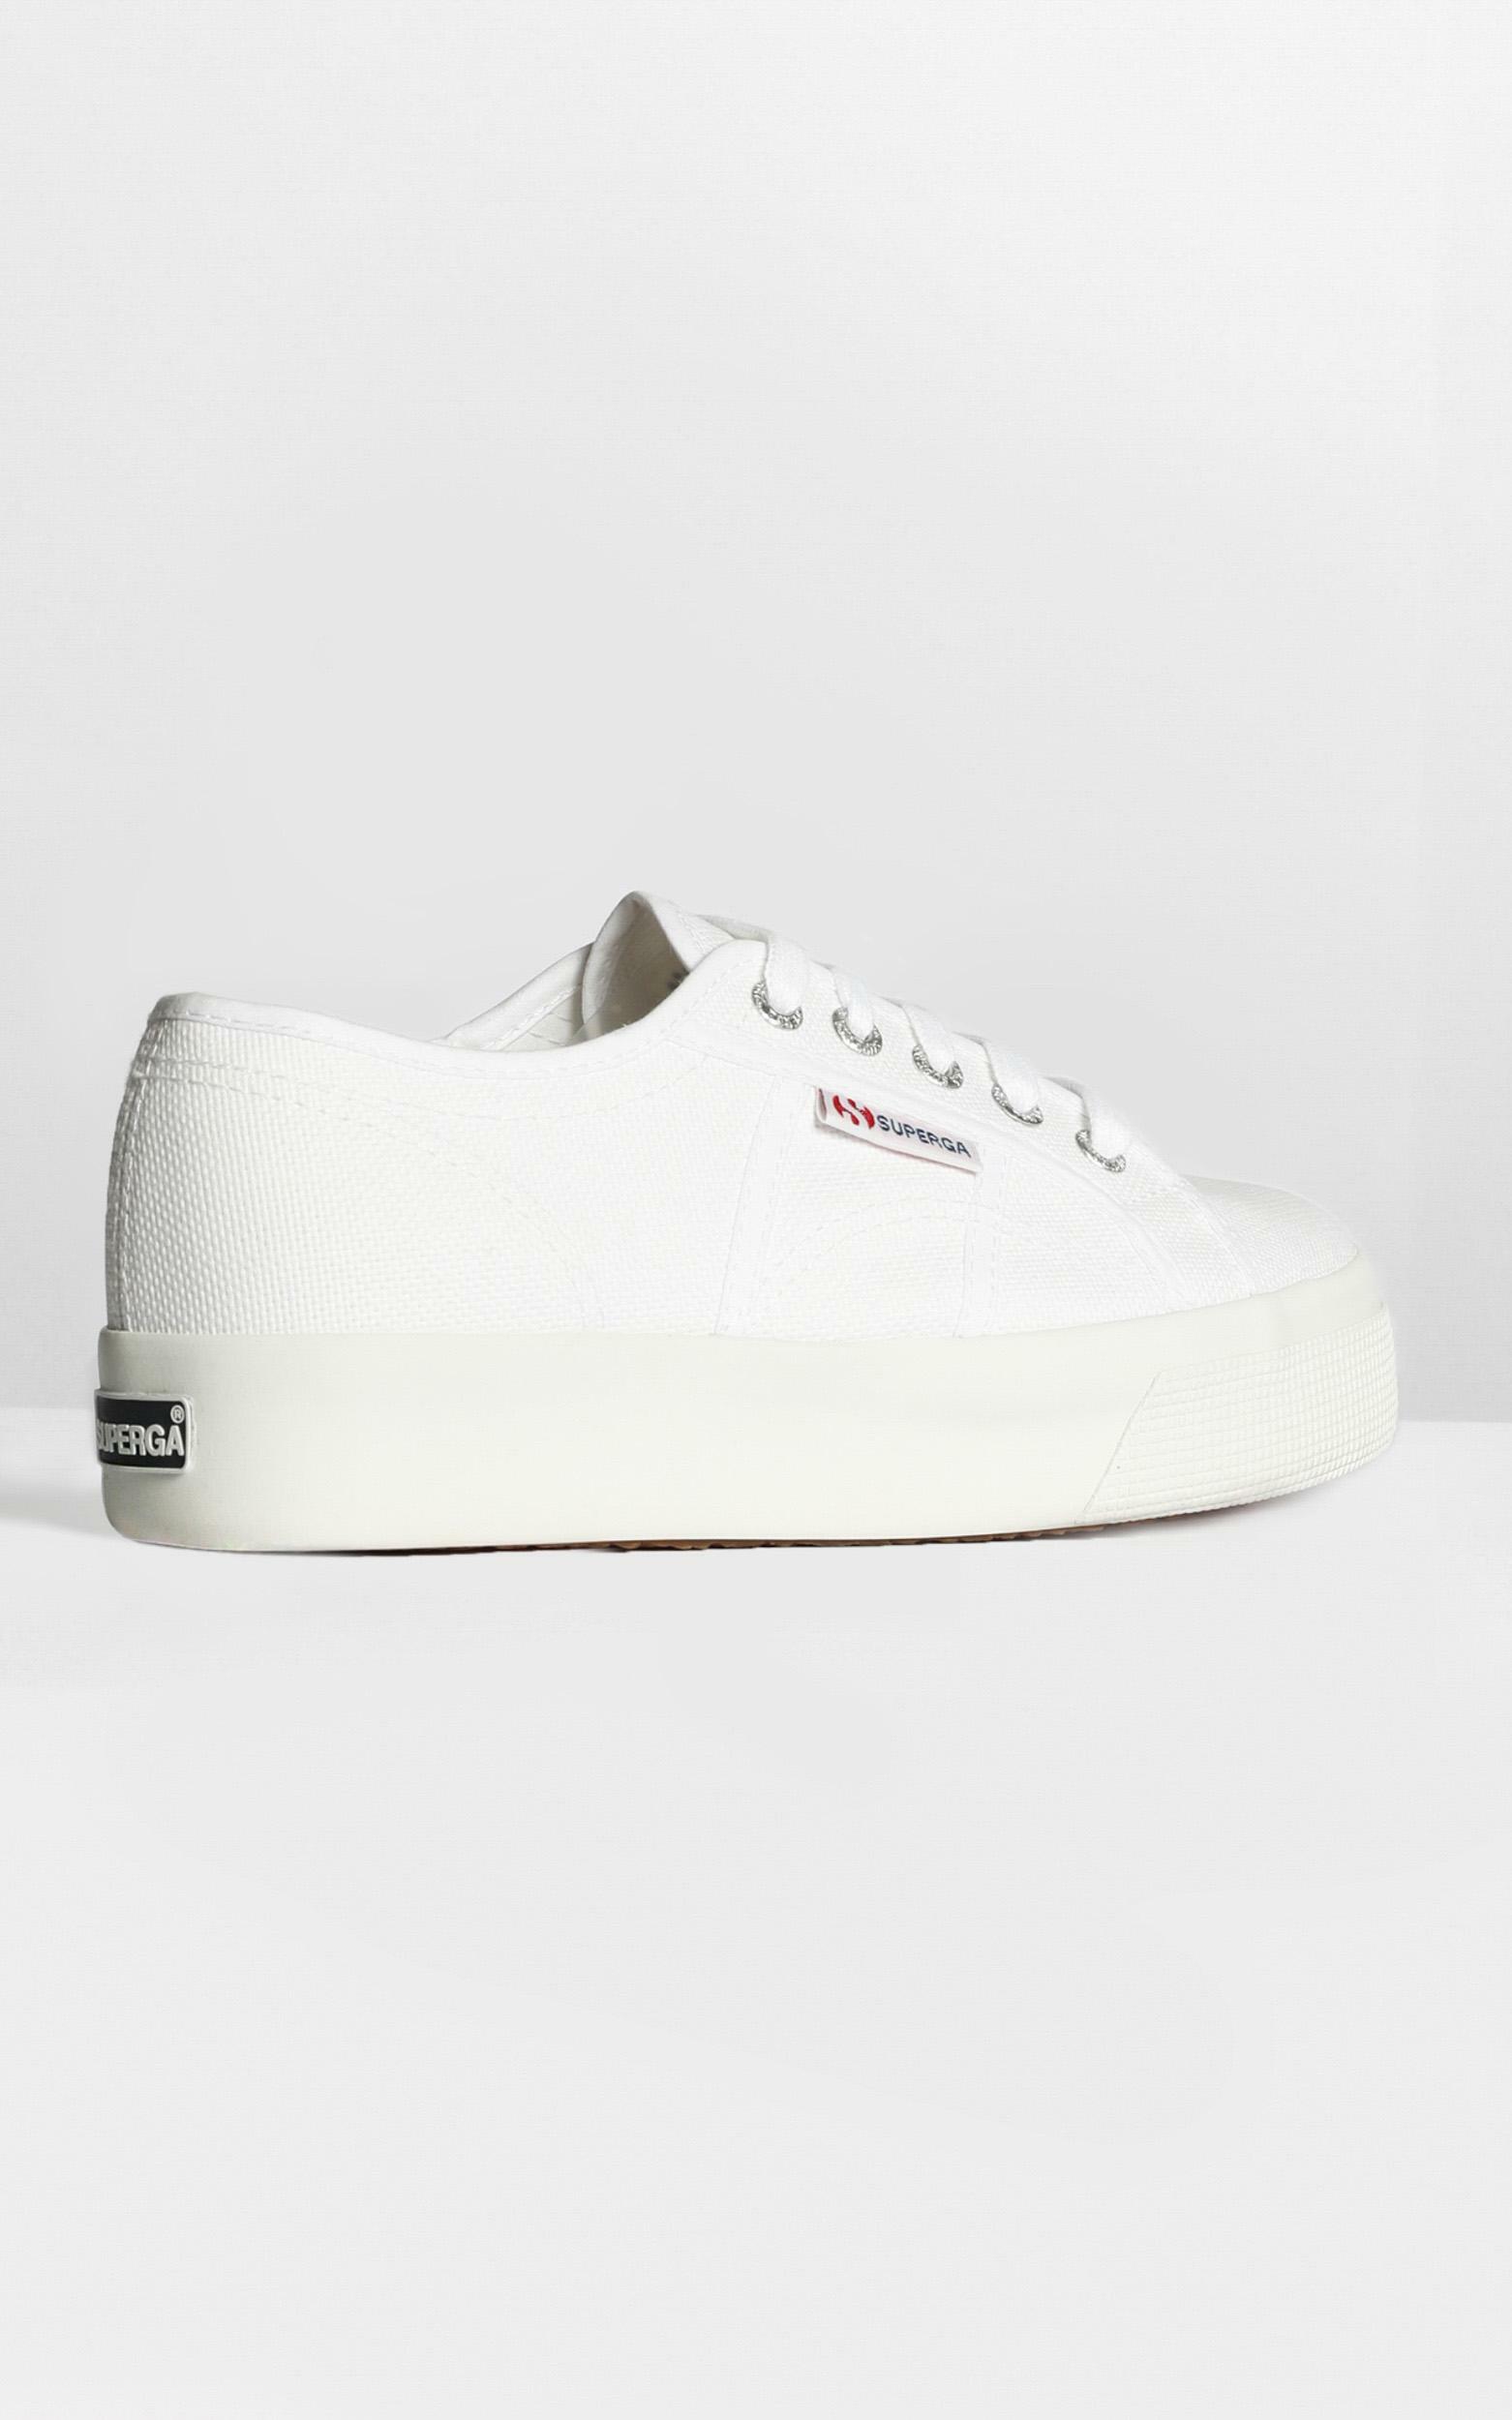 Superga- 2730 Cotu Sneakers in White Canvas - 06, WHT1, hi-res image number null